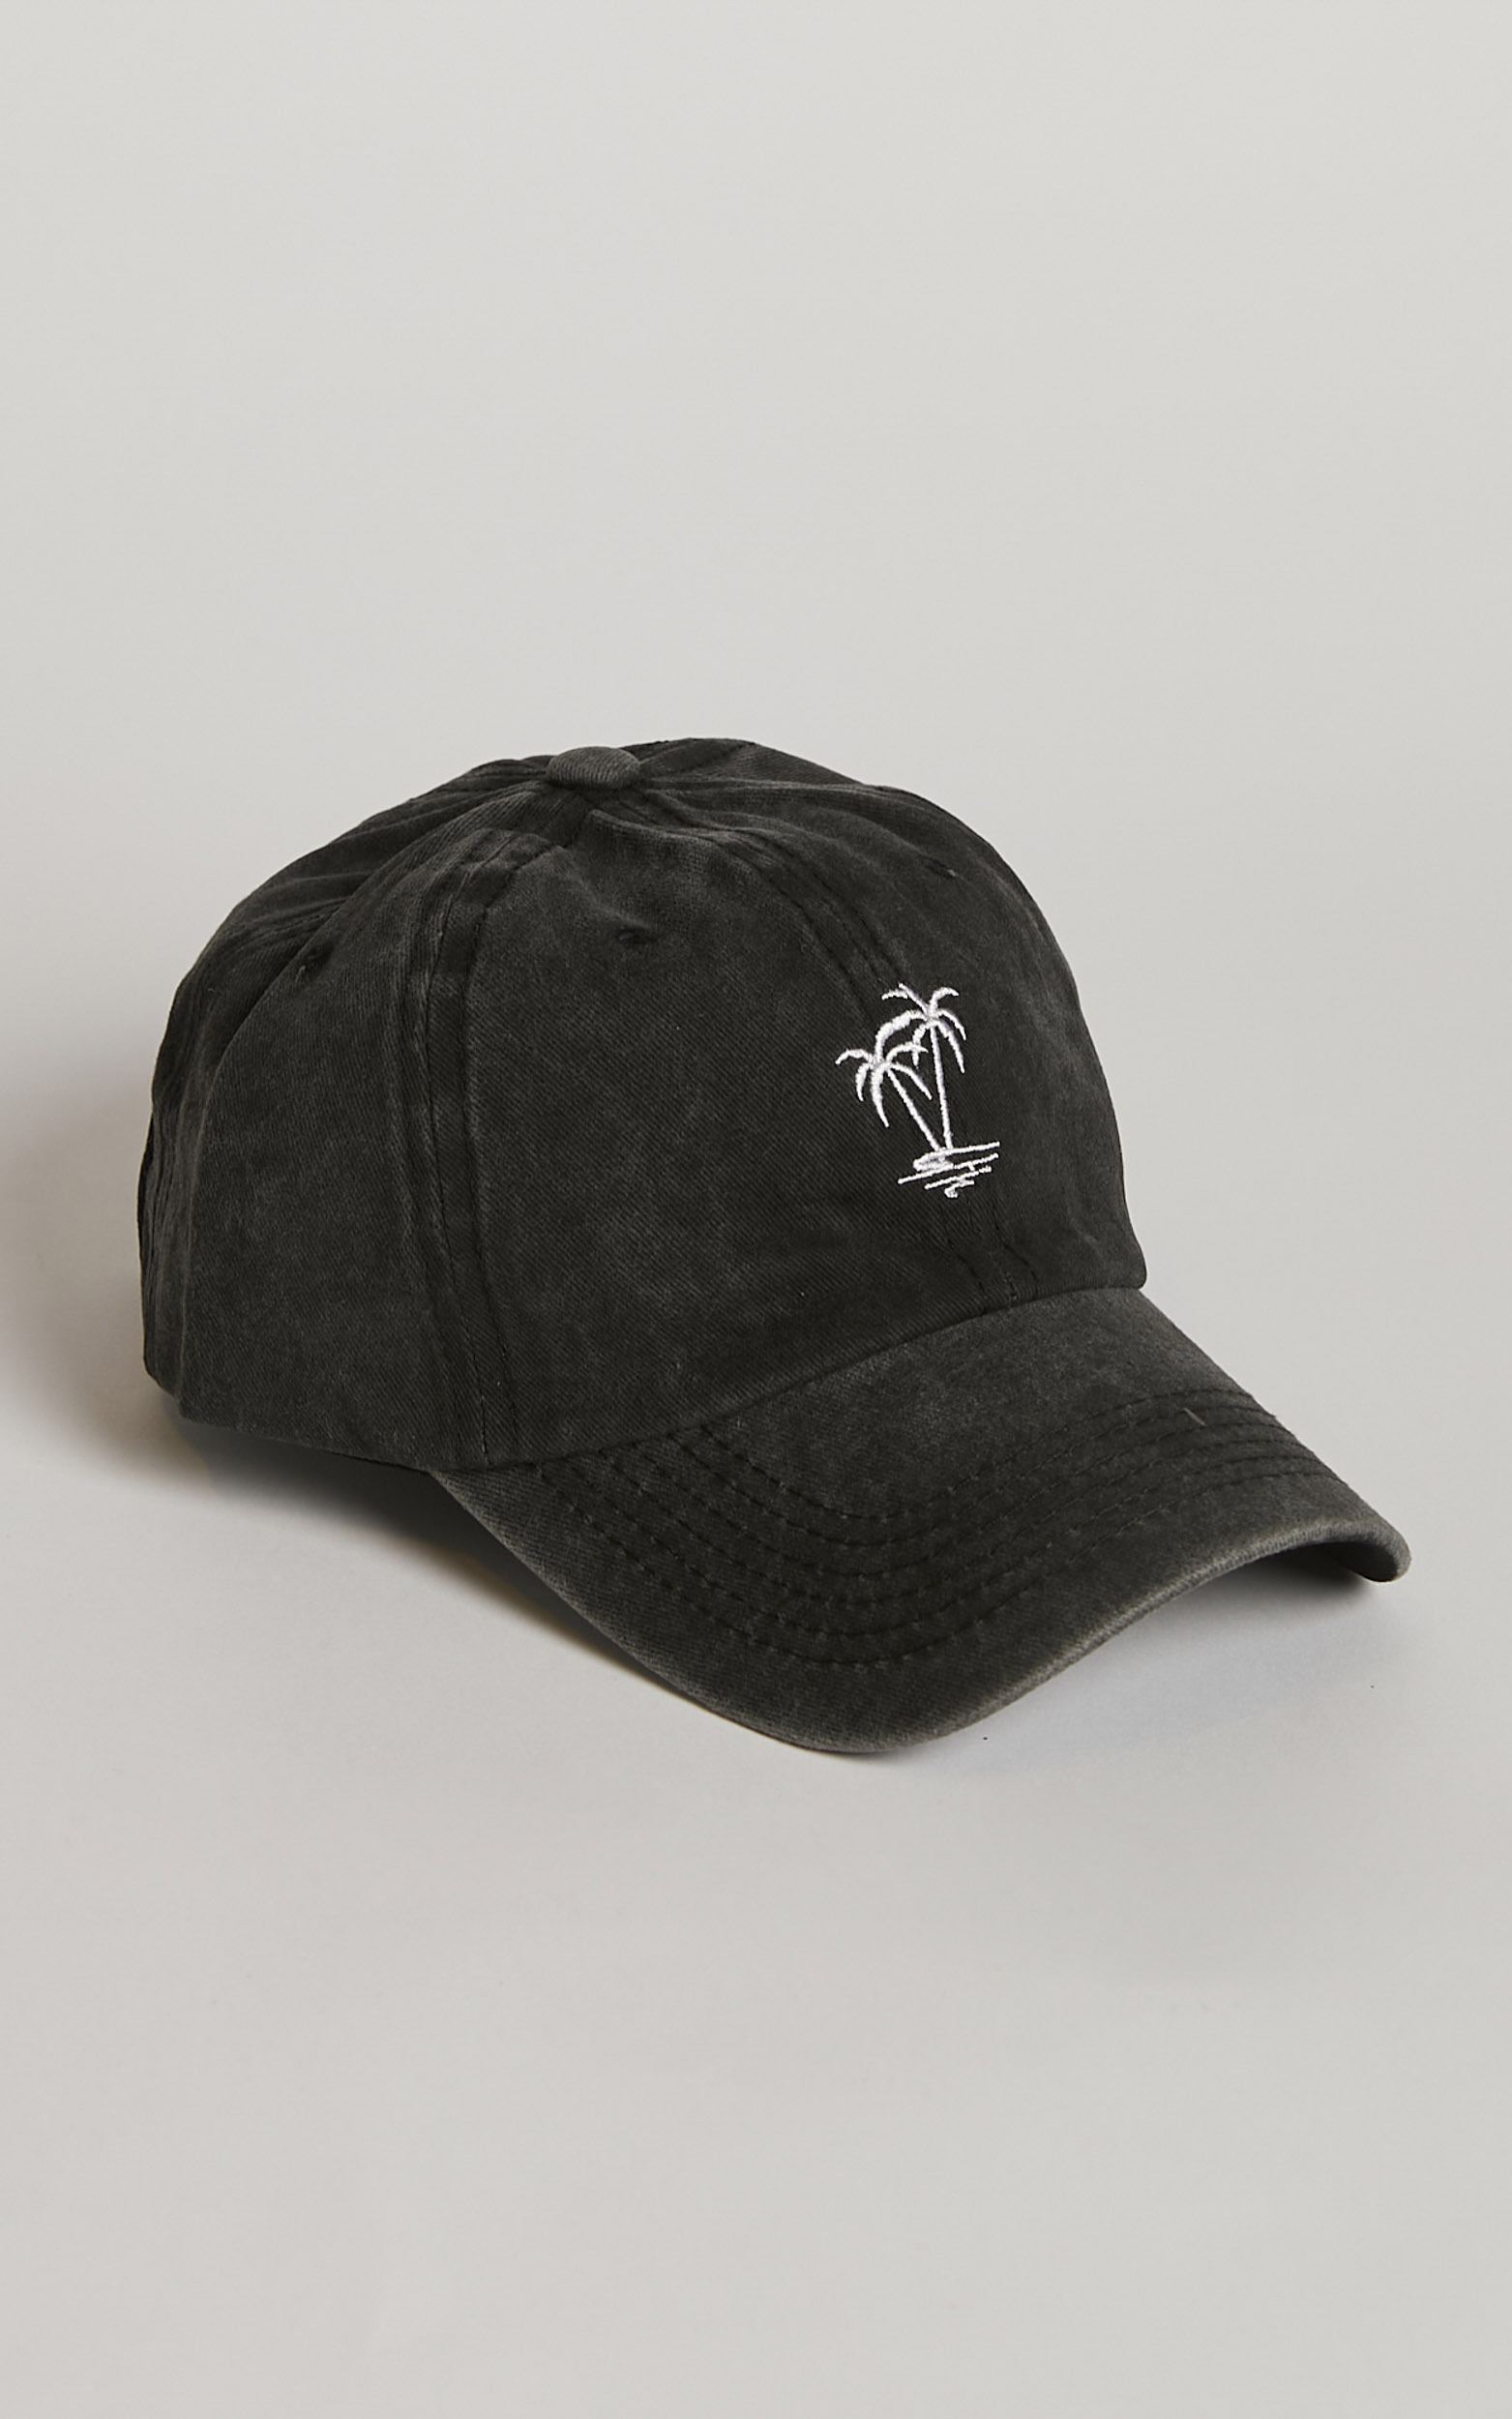 Lidiane Cap - Embroidered Palm Tree Cap in Dark Grey - NoSize, GRY1, hi-res image number null